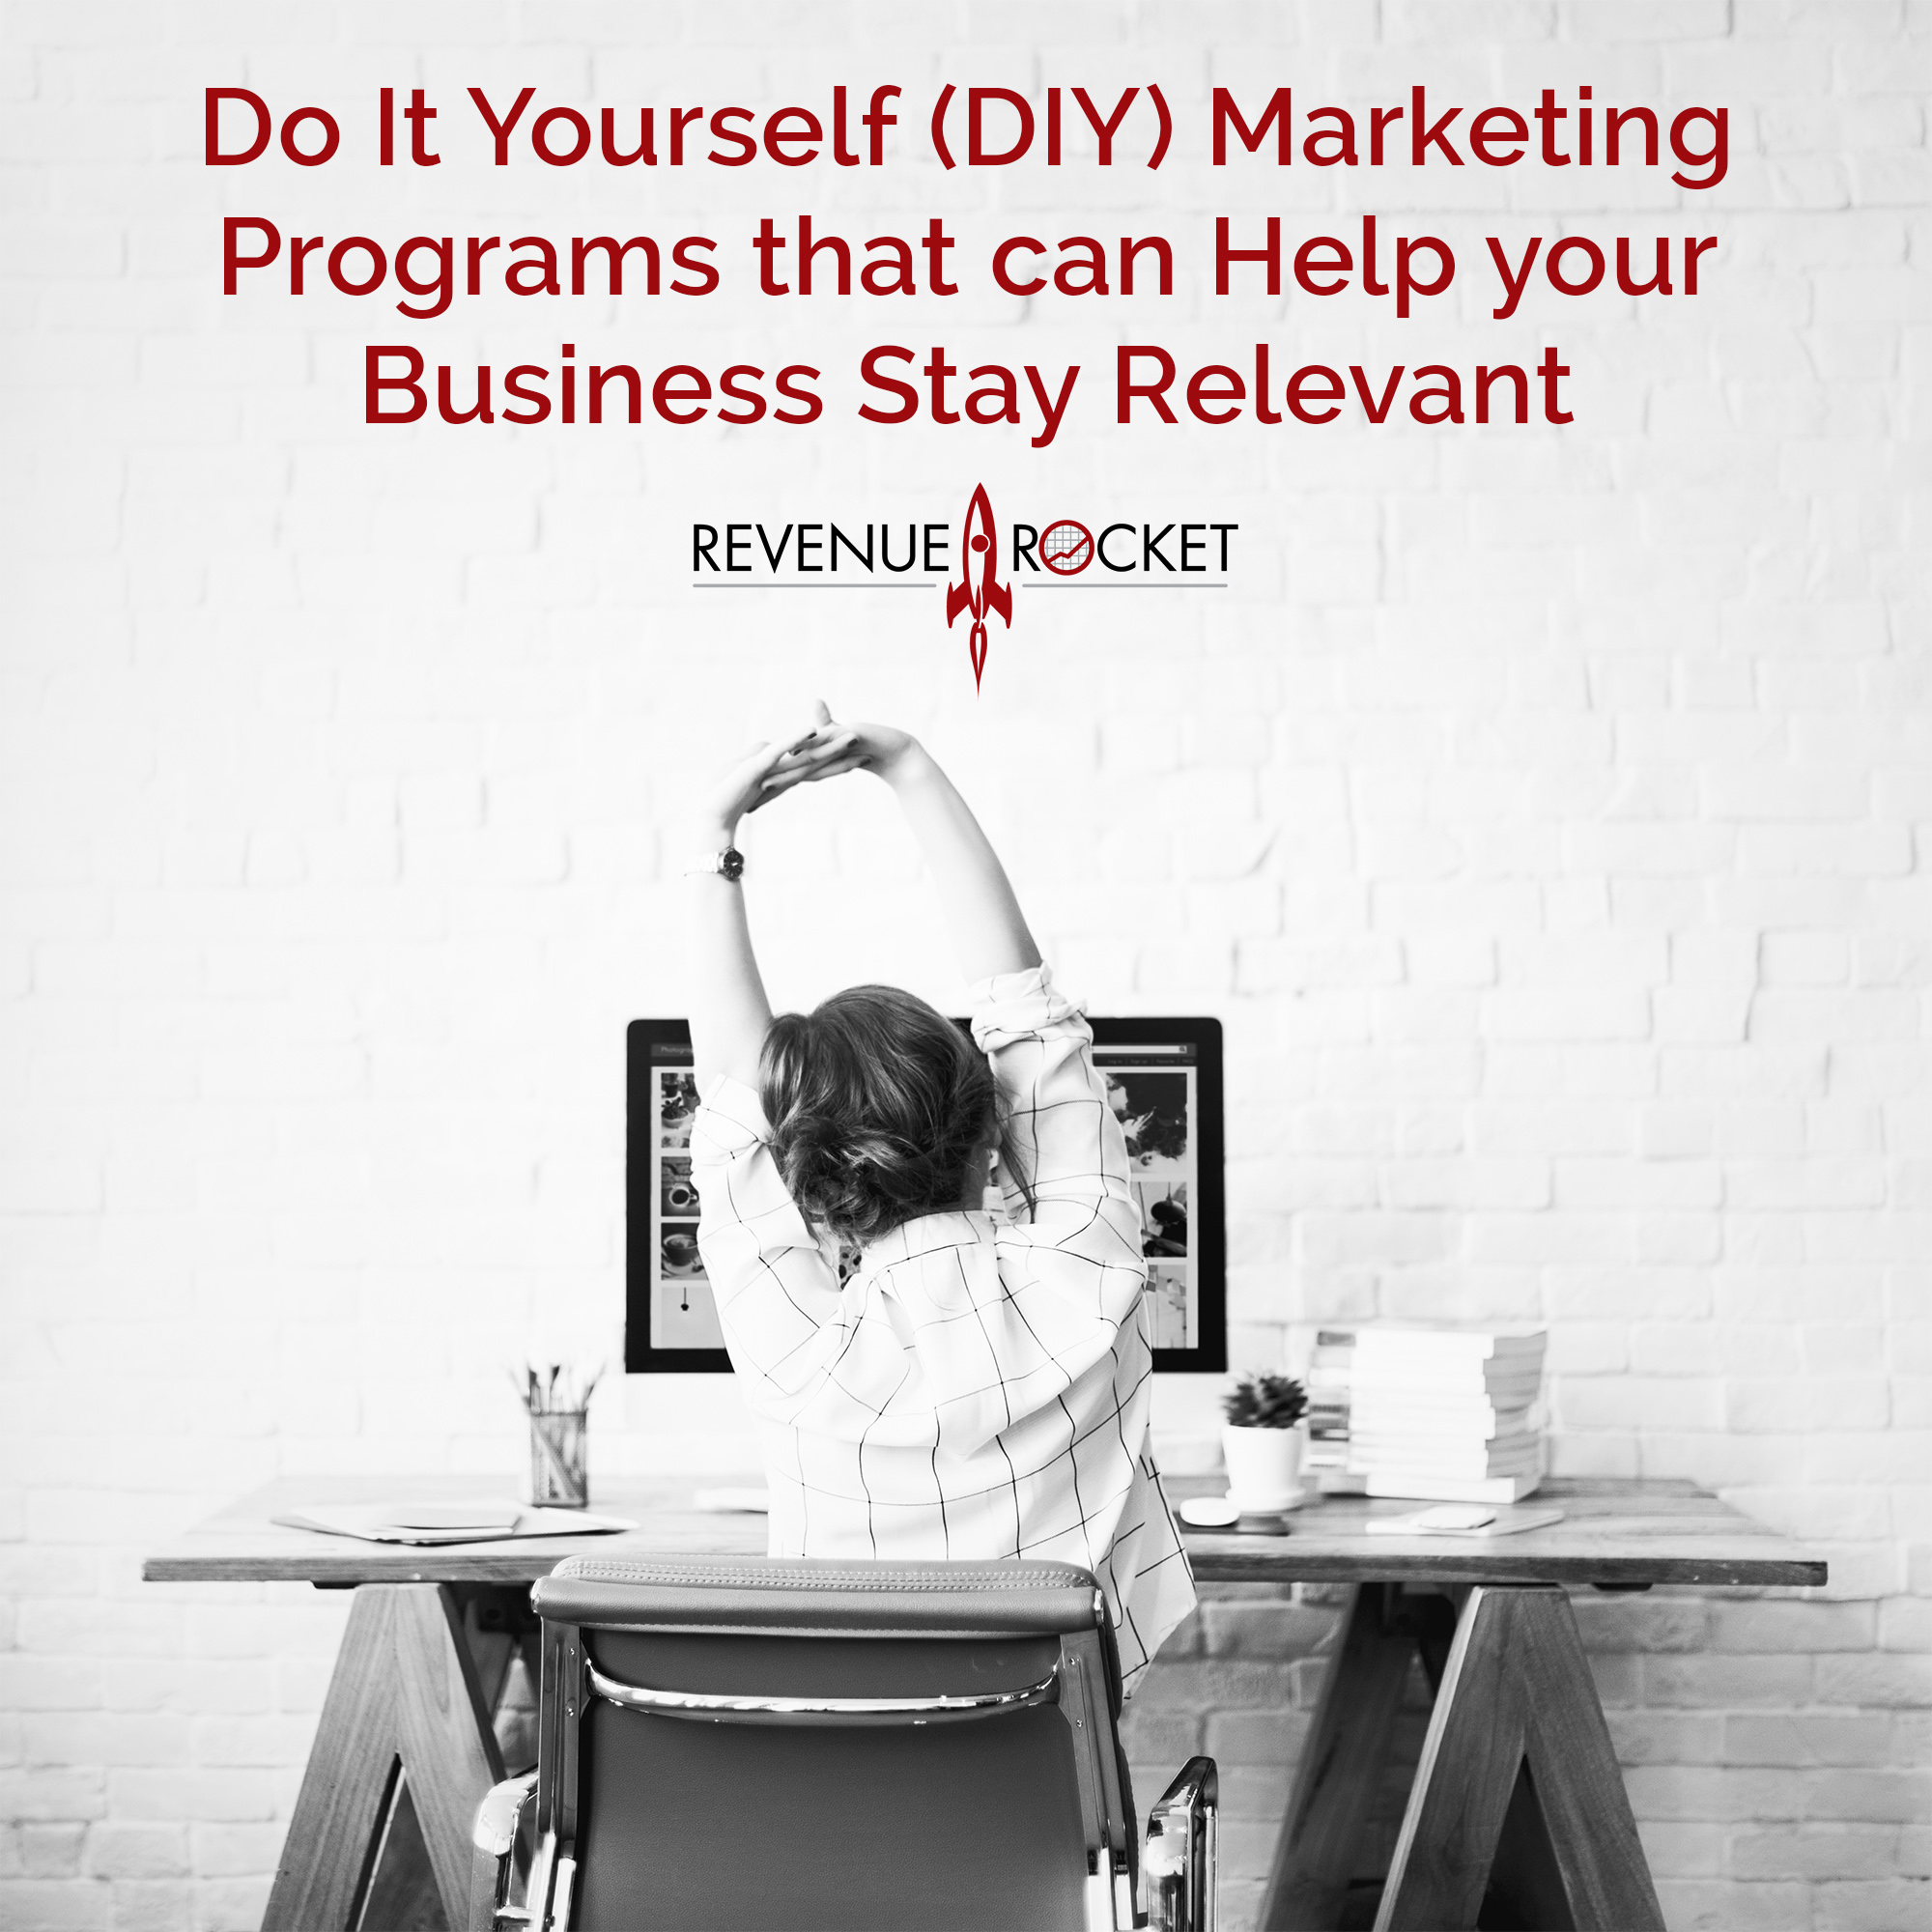 Do it yourself (DIY) Marketing Programs that can help your business